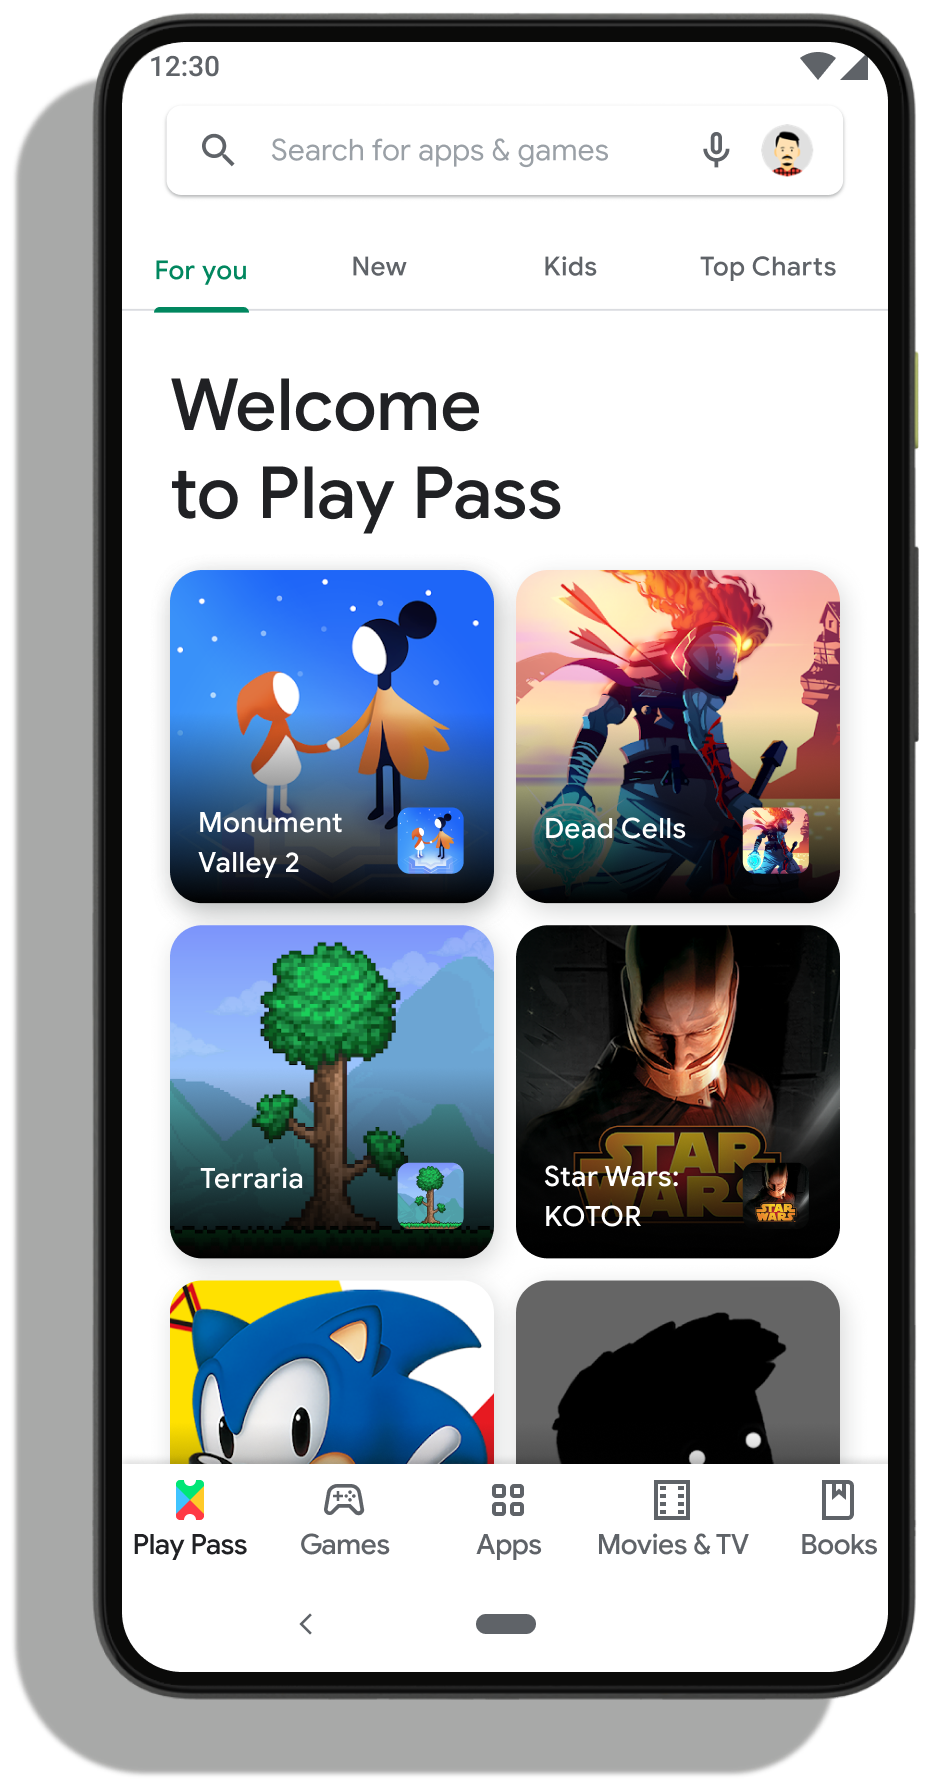 Is Google Play Pass for you?